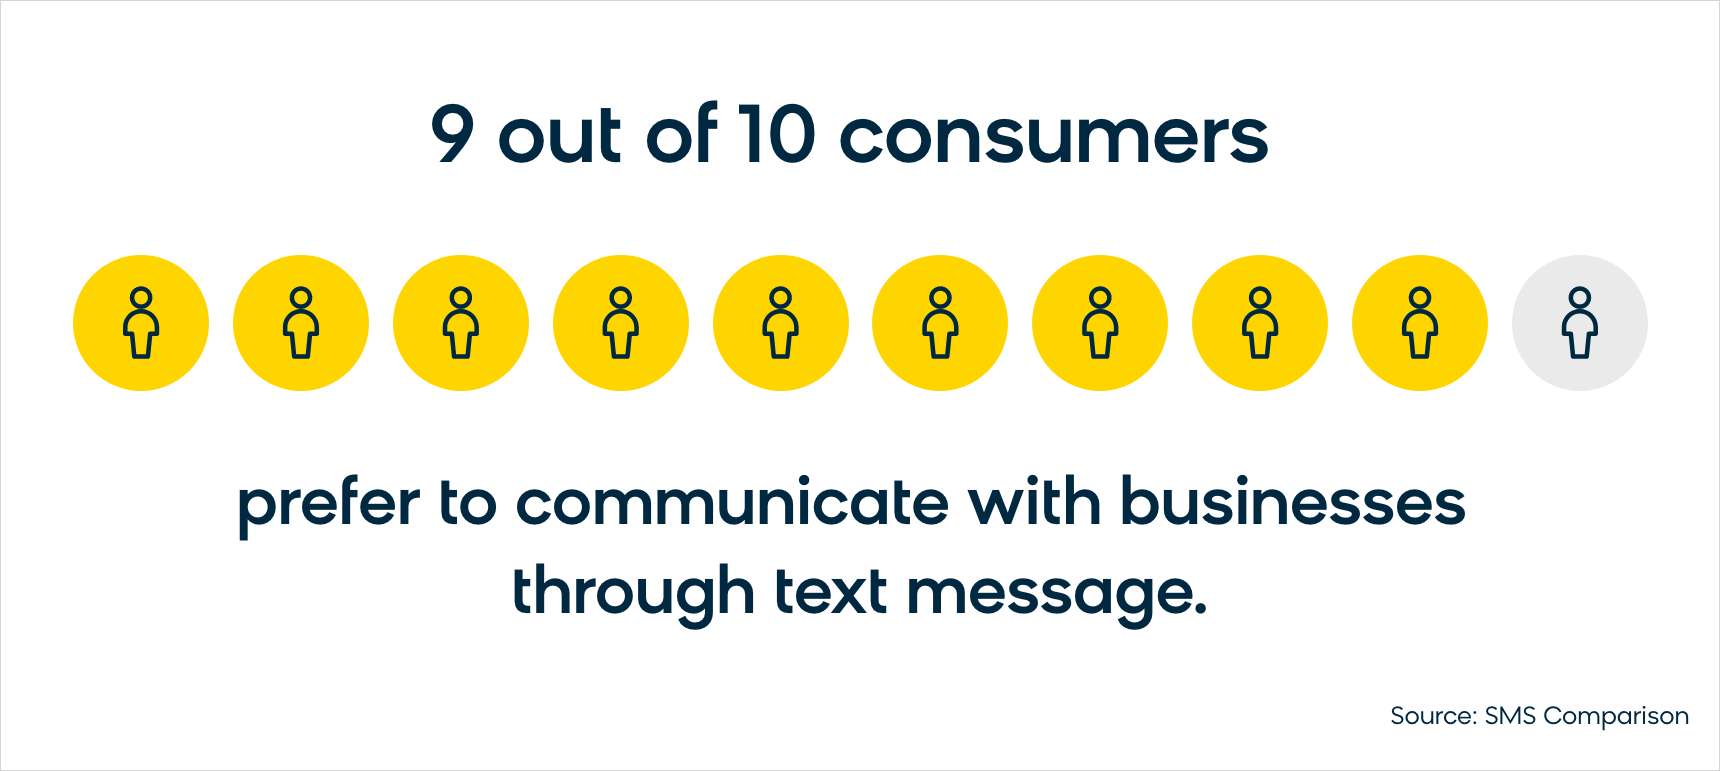 9 out of 10 consumers prefer to communicate with businesses through text message.